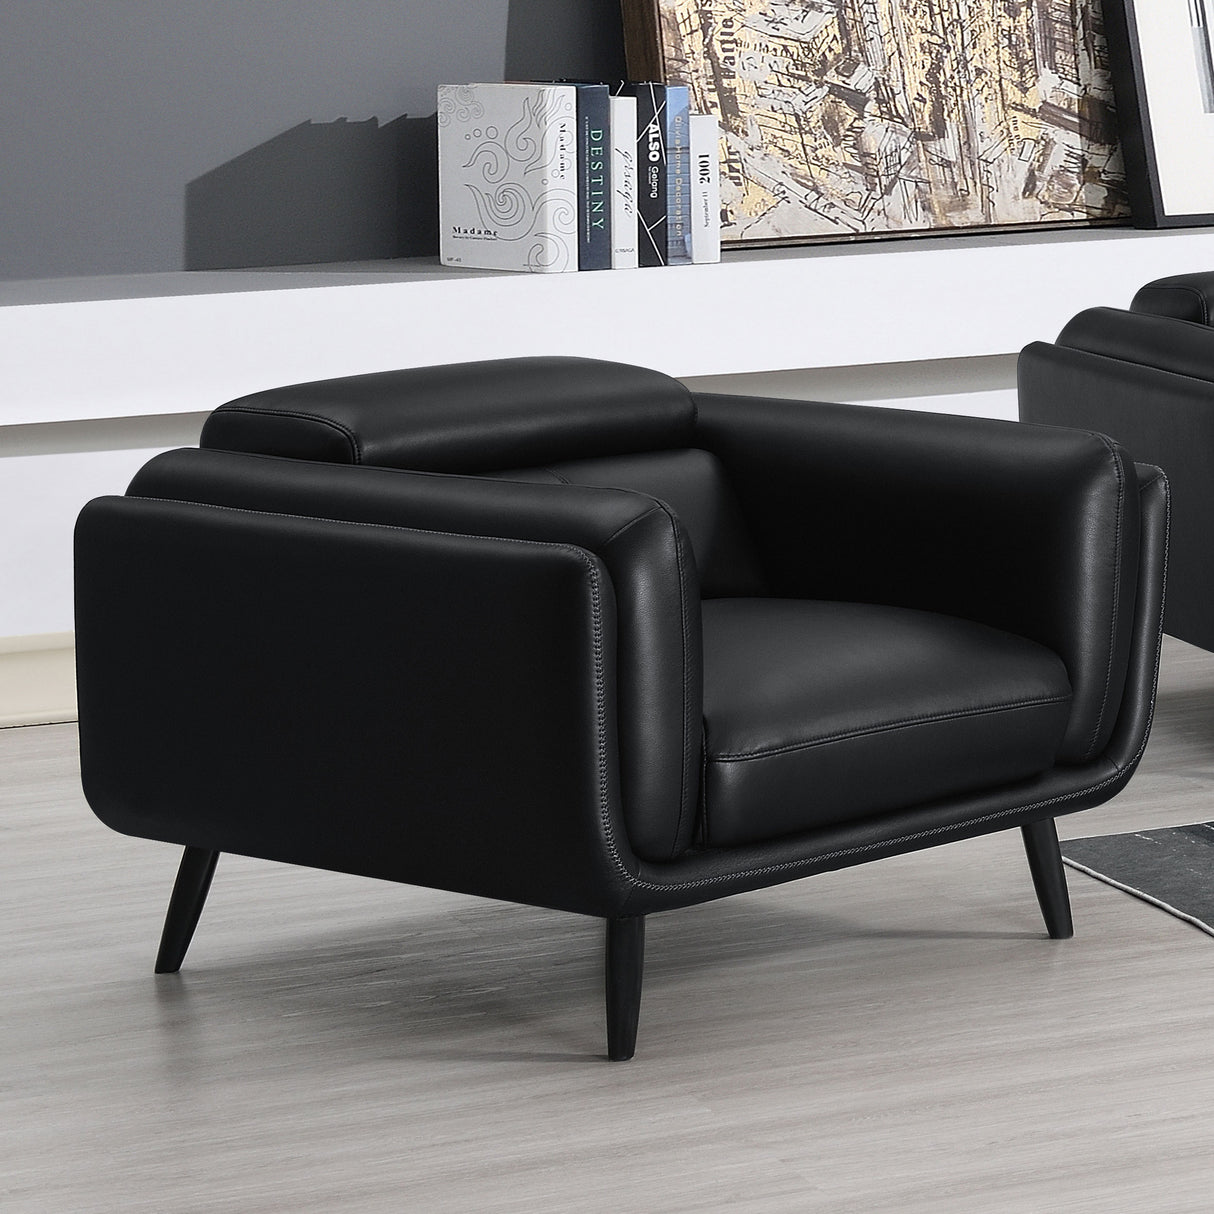 Chair - Shania Track Arms Chair with Tapered Legs Black